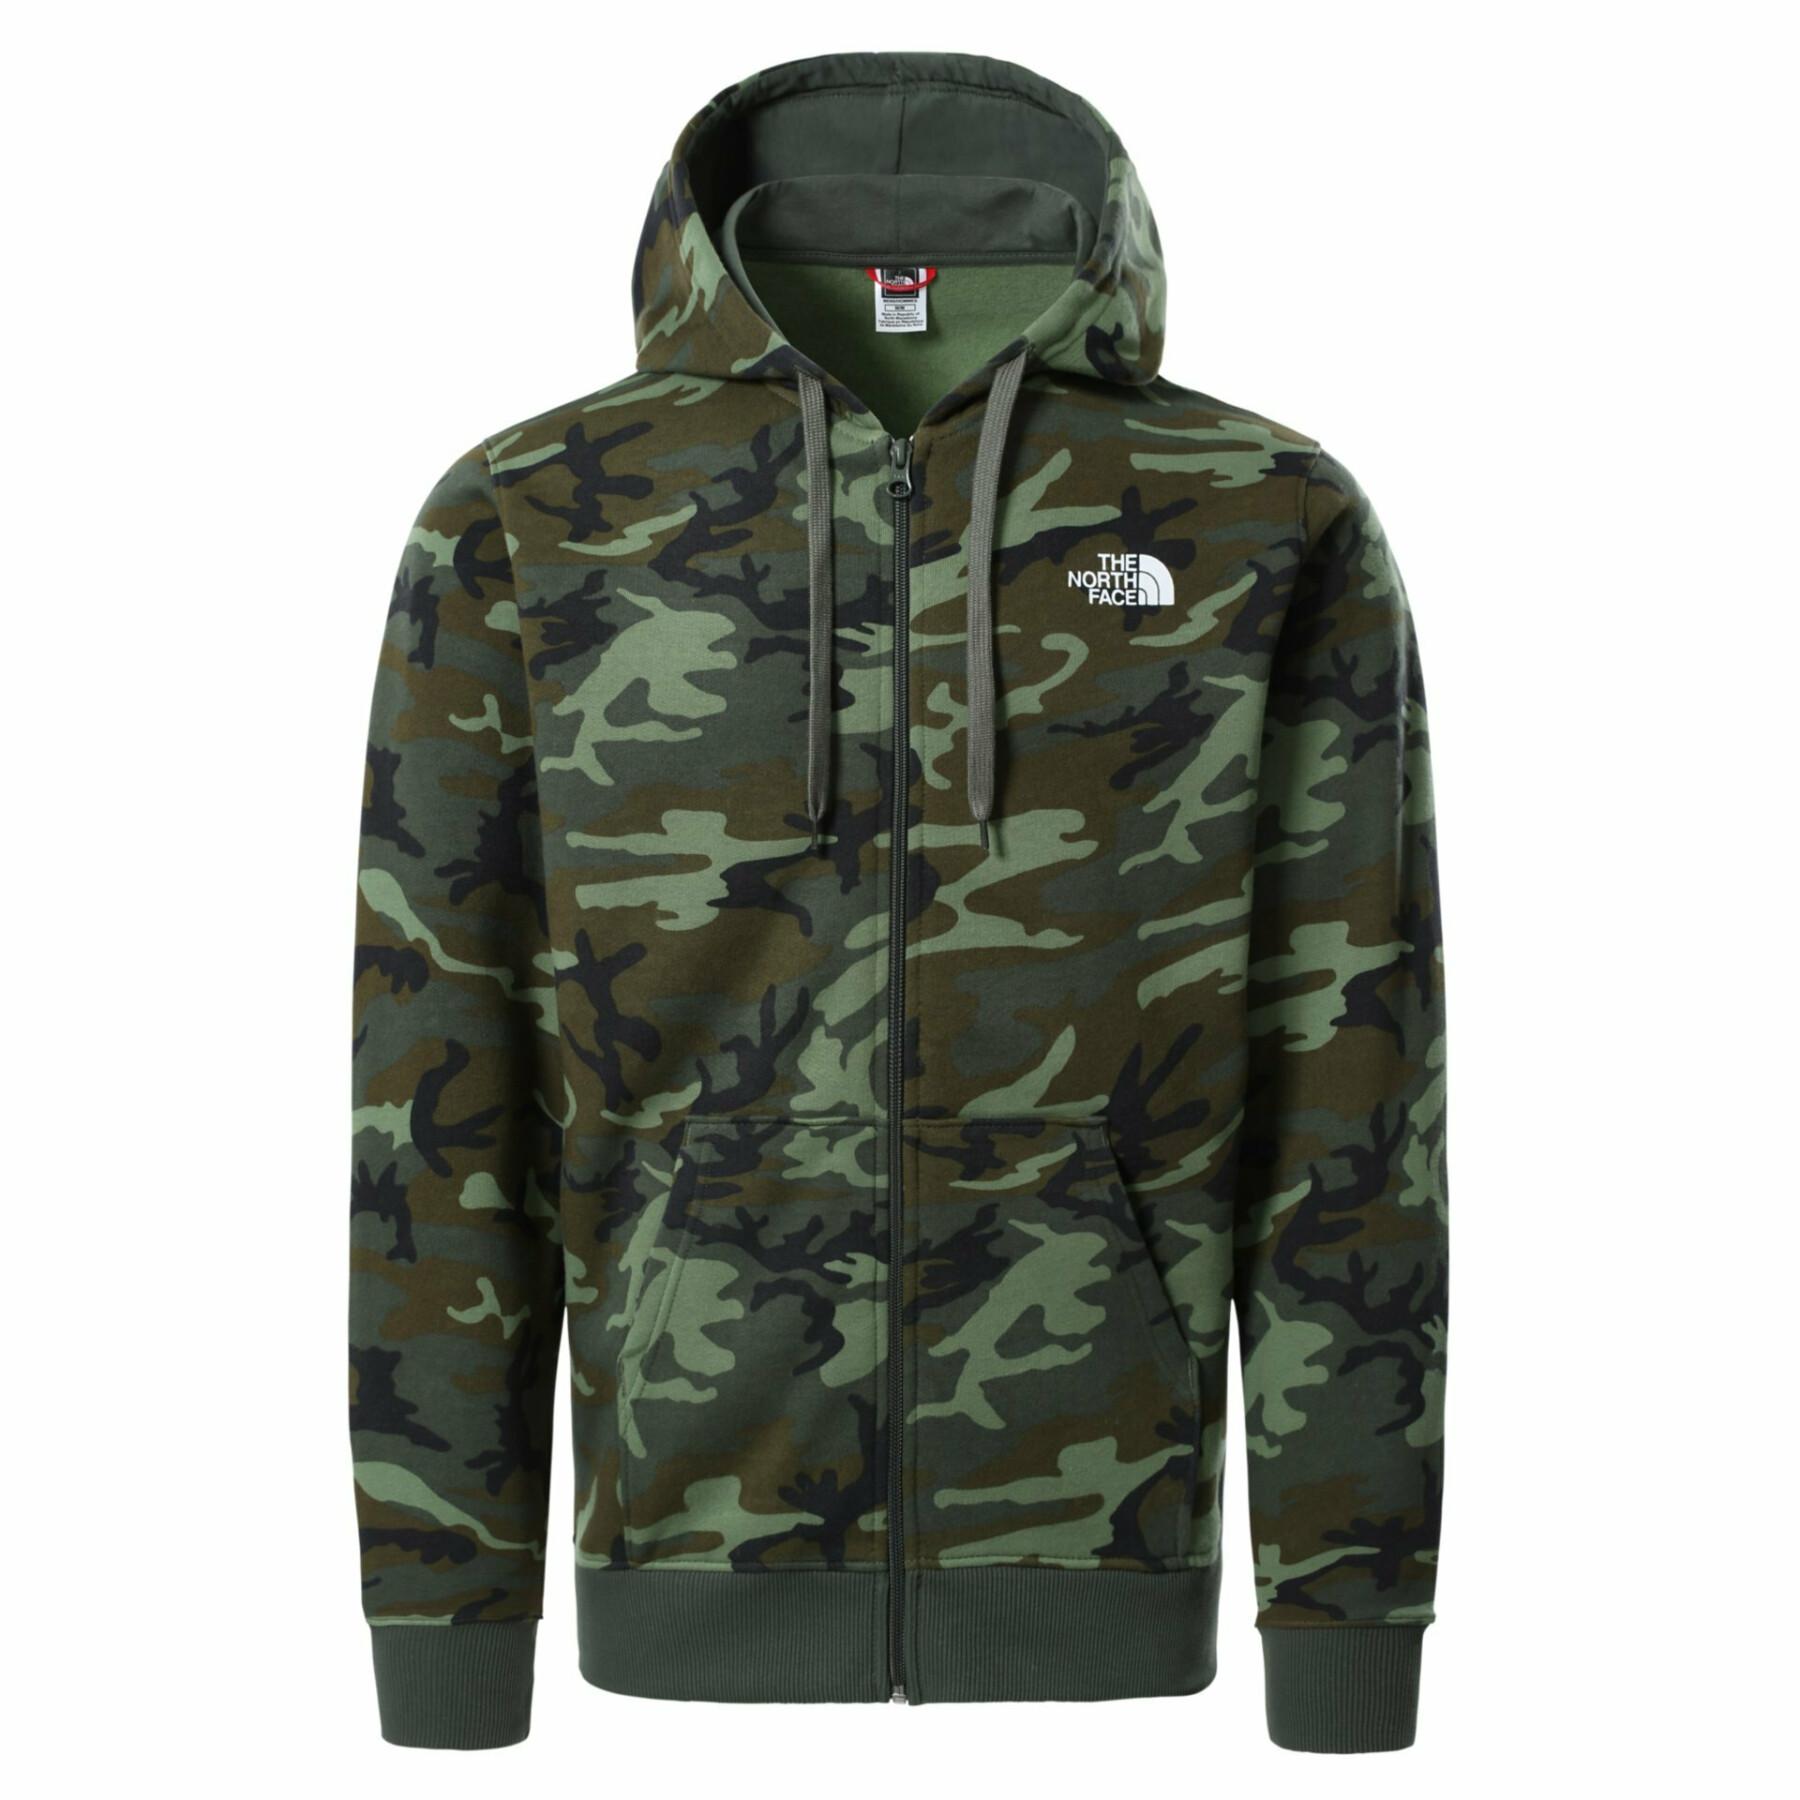 Sweatshirt with zip The North Face Open Gate